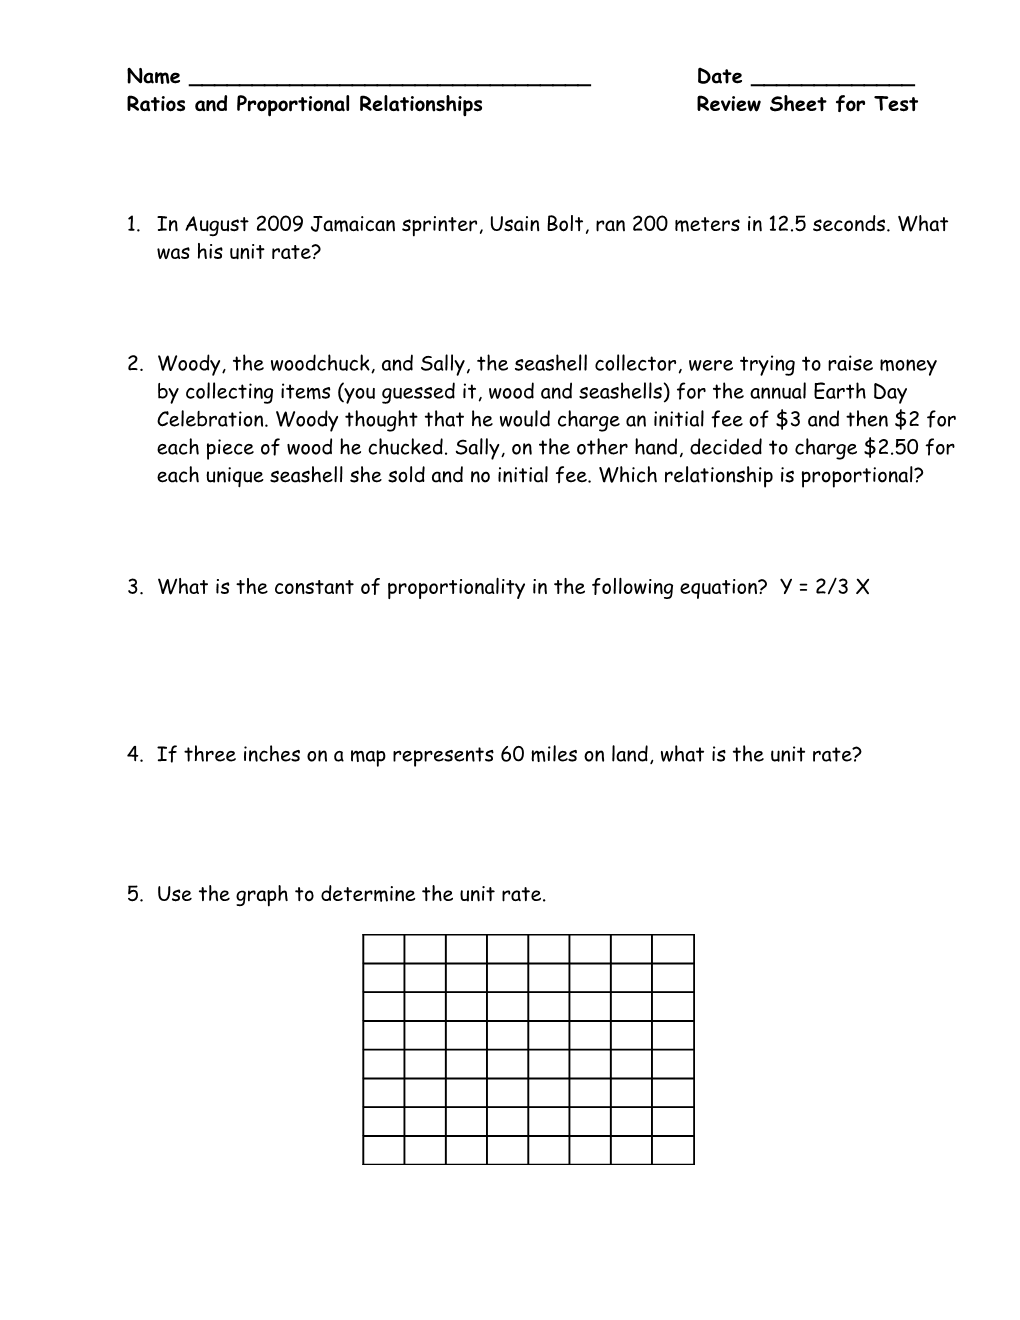 Ratios and Proportional Relationshipsreview Sheet for Test